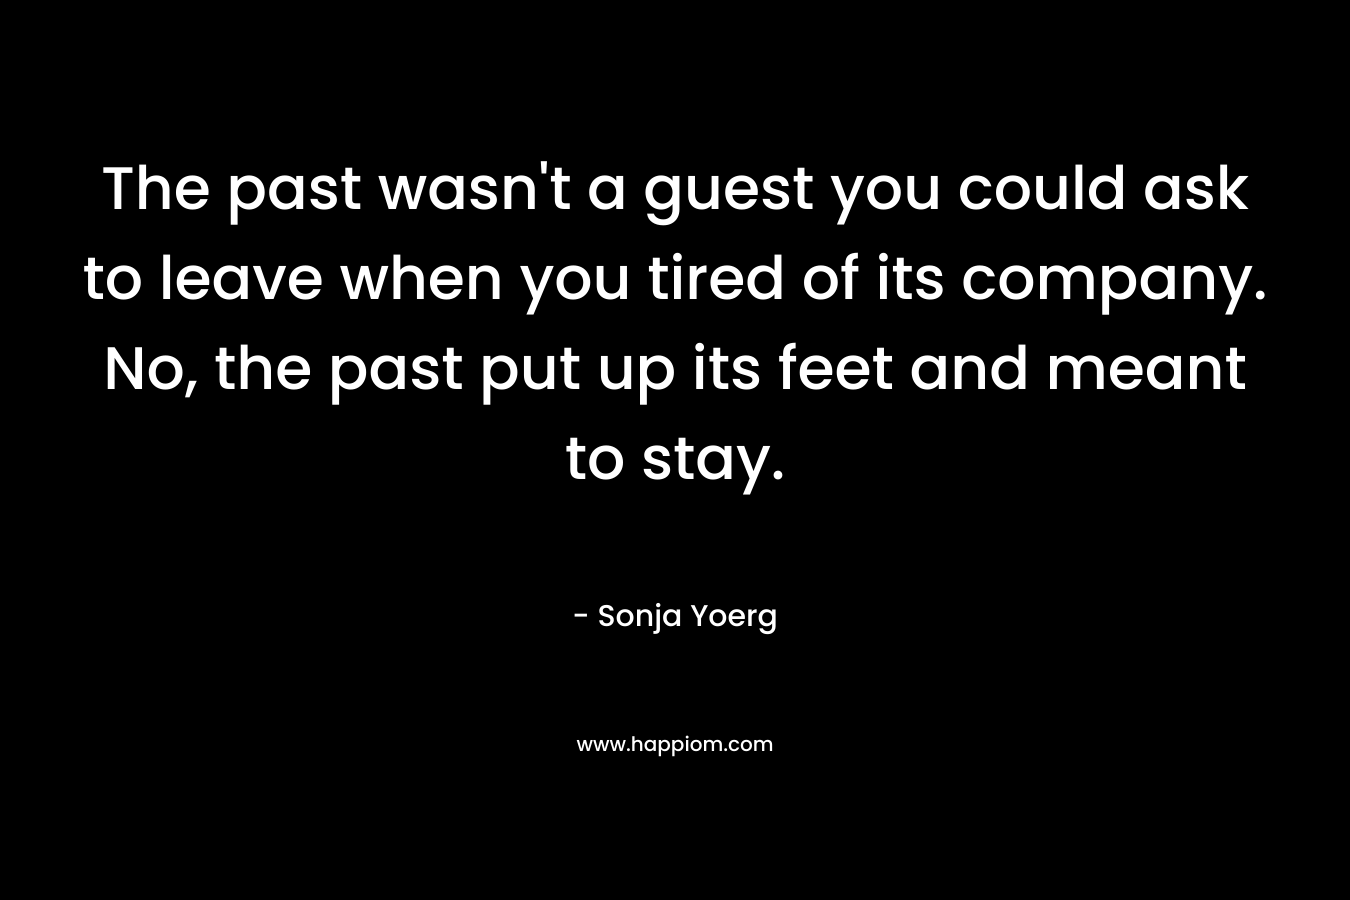 The past wasn't a guest you could ask to leave when you tired of its company. No, the past put up its feet and meant to stay.